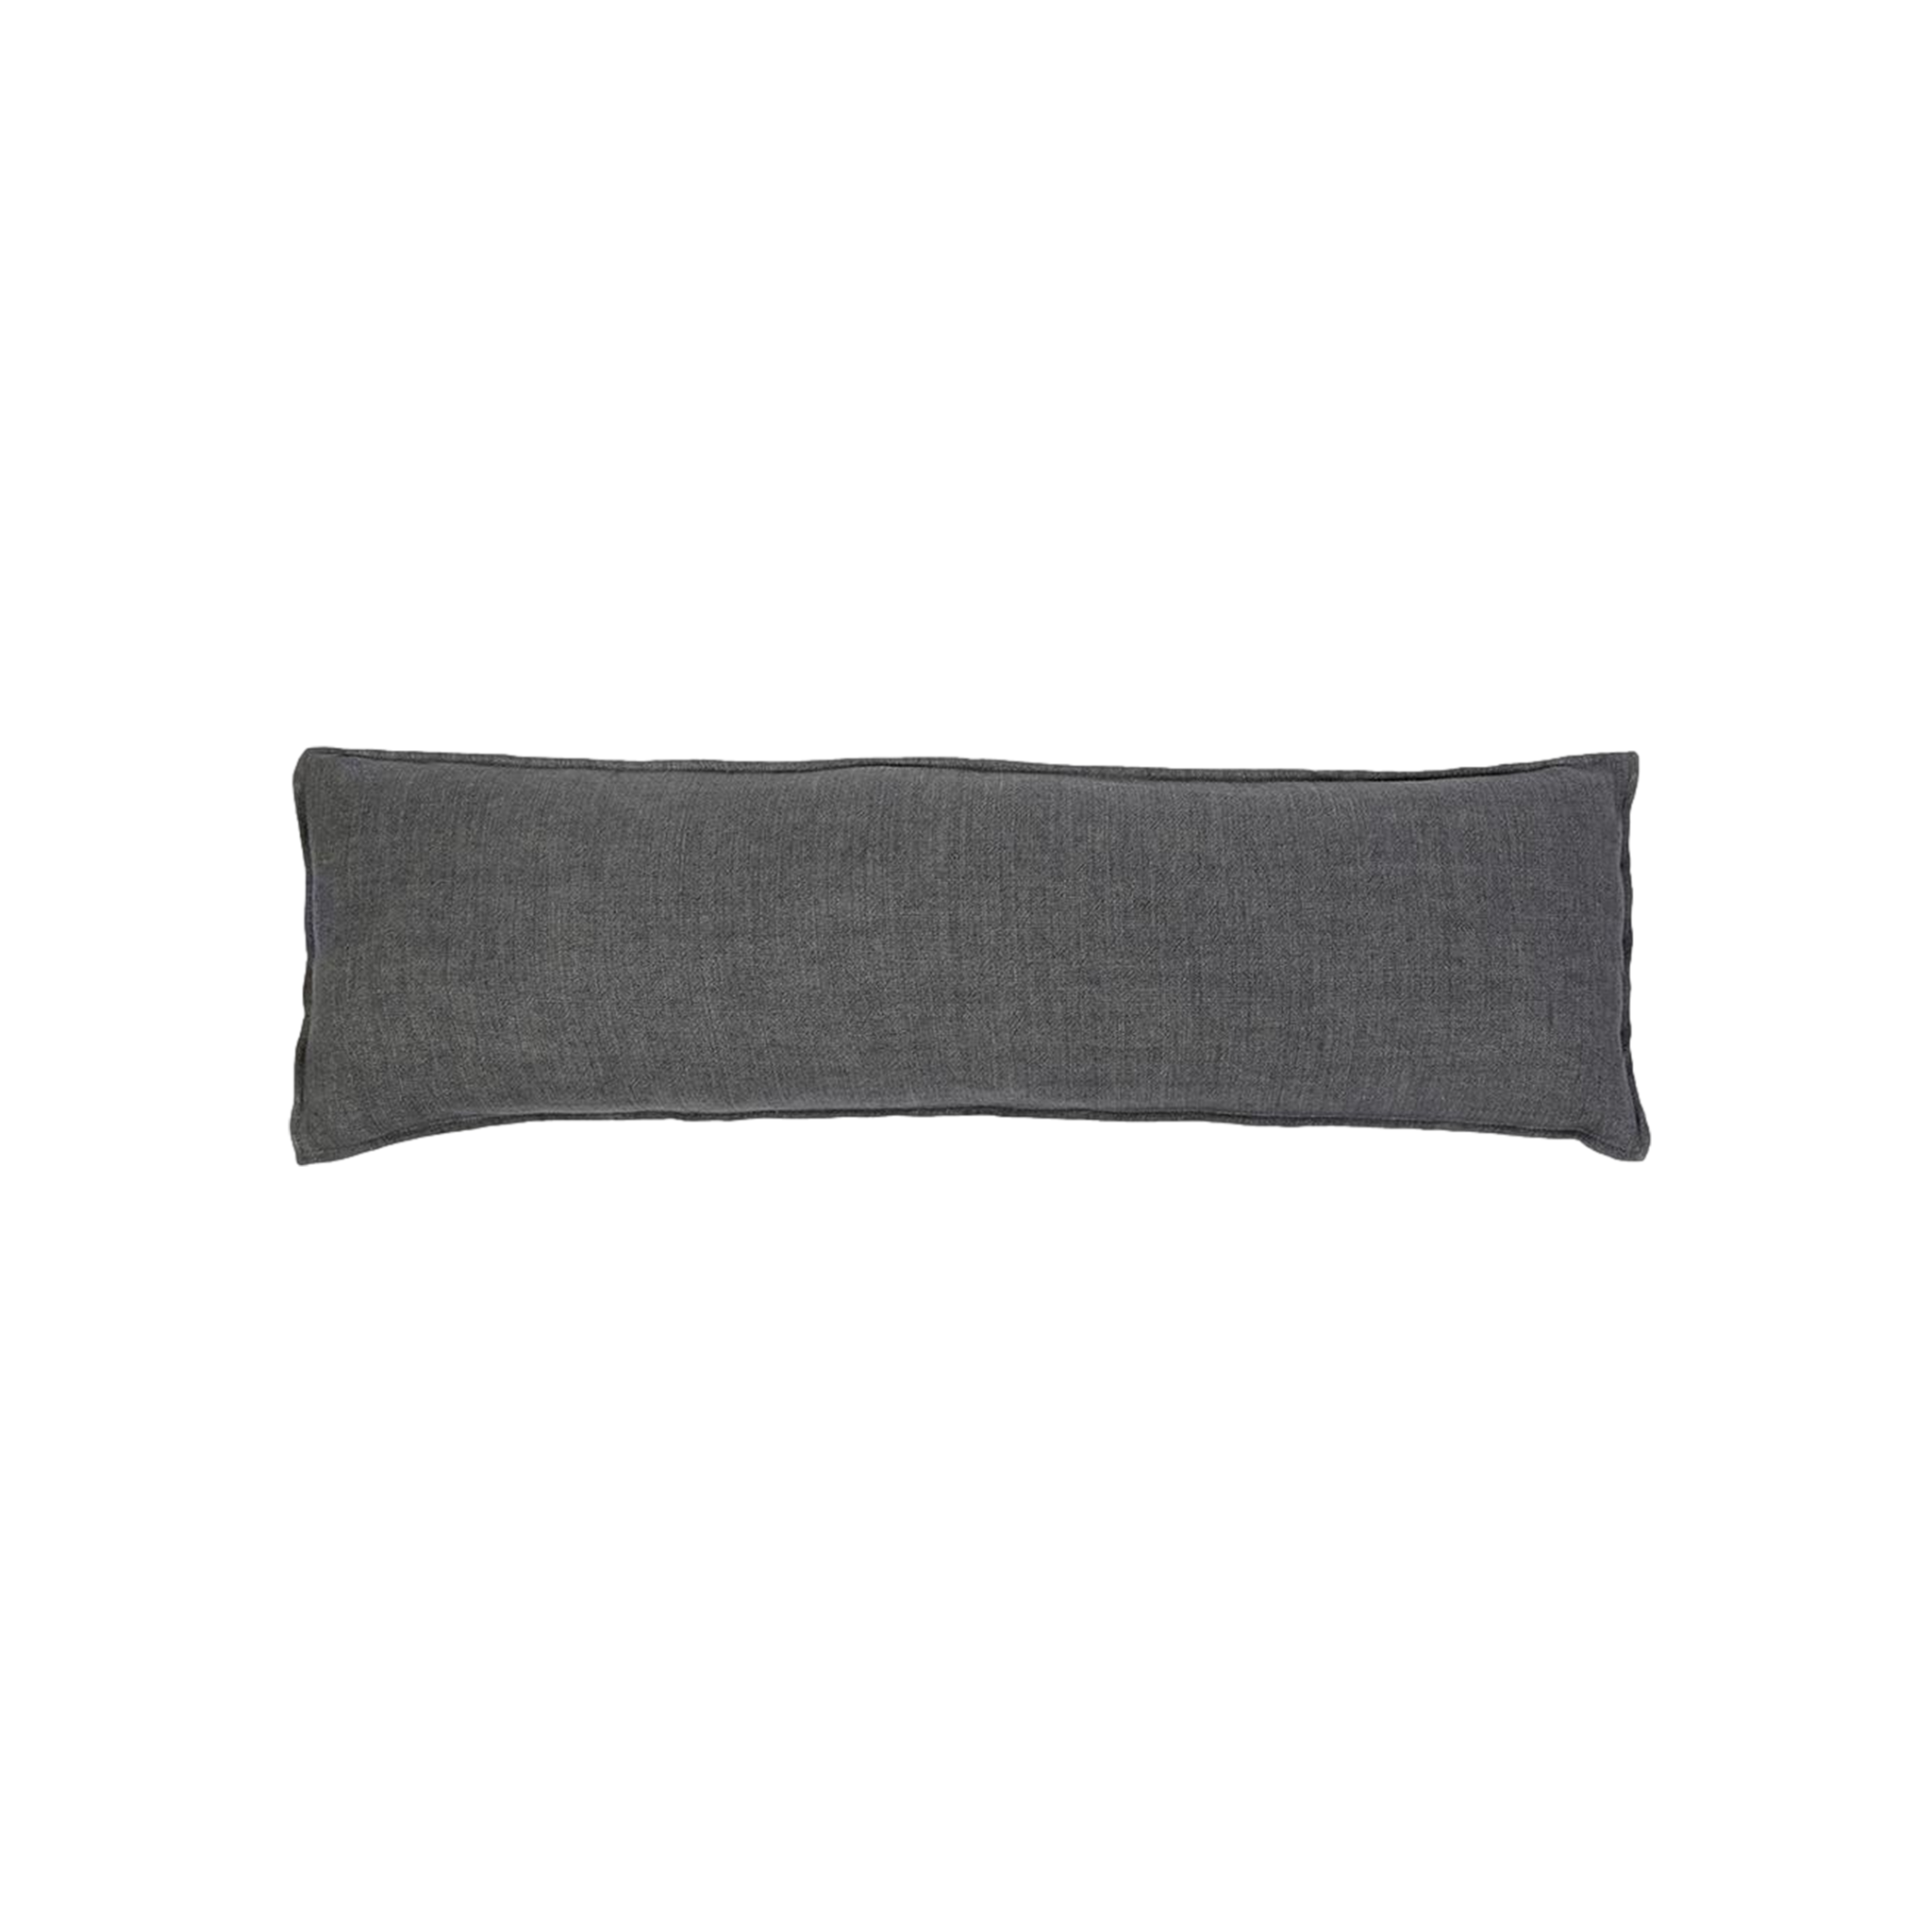 Montauk Body Pillow in Charcoal